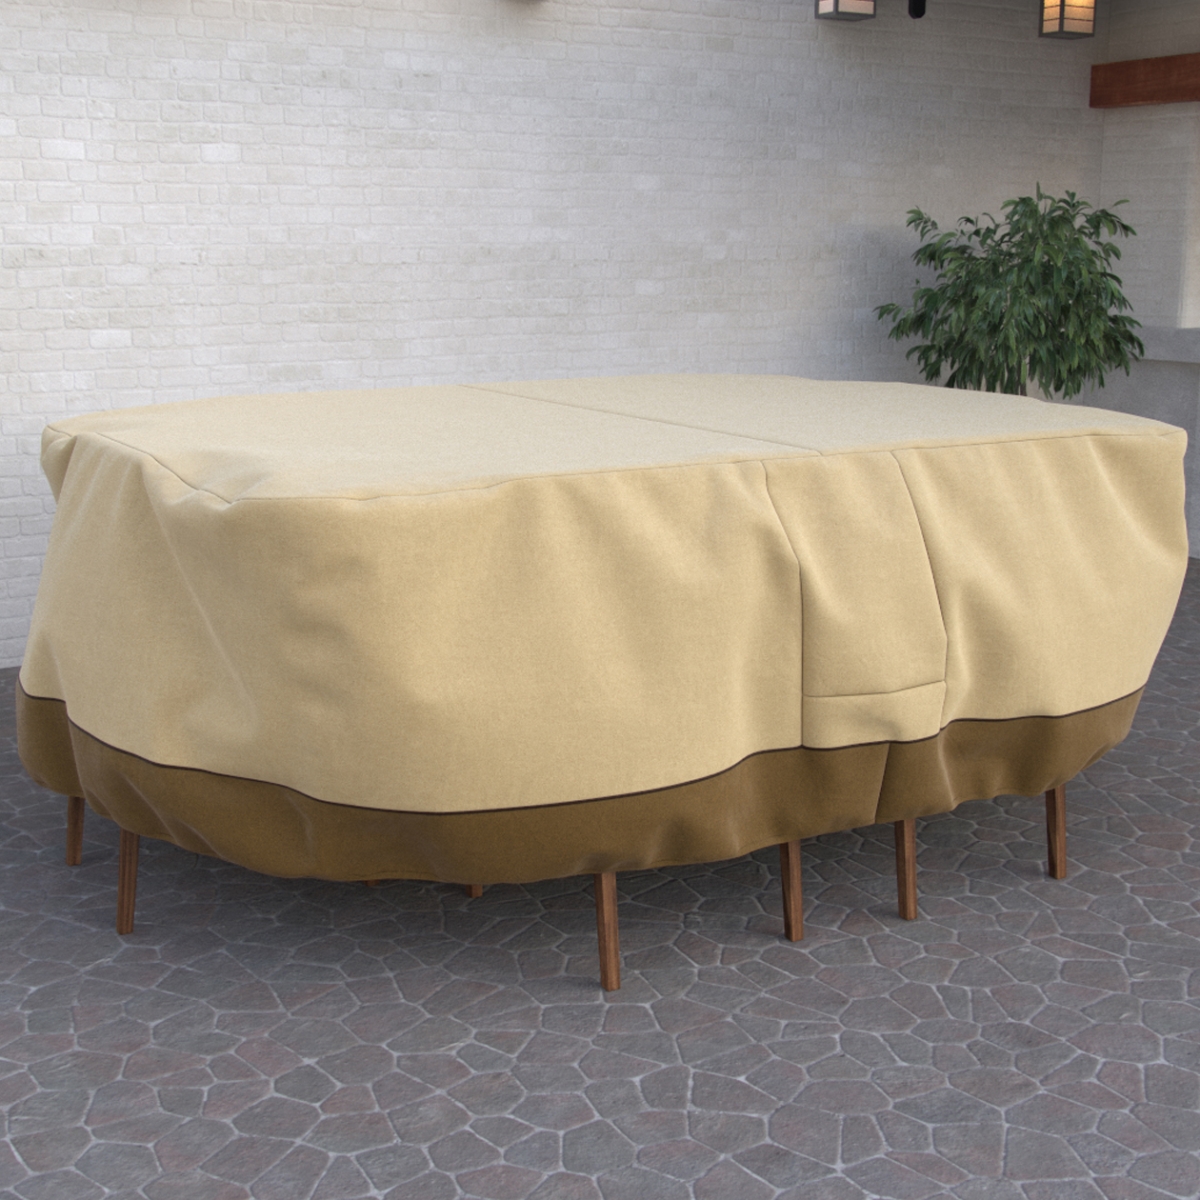 Fade Proof Heavy Duty Oval Or Rectangular Durable & Water Resistant Outdoor Patio Table & Chair Set Cover, Pebble, Large - Up To 108 In.